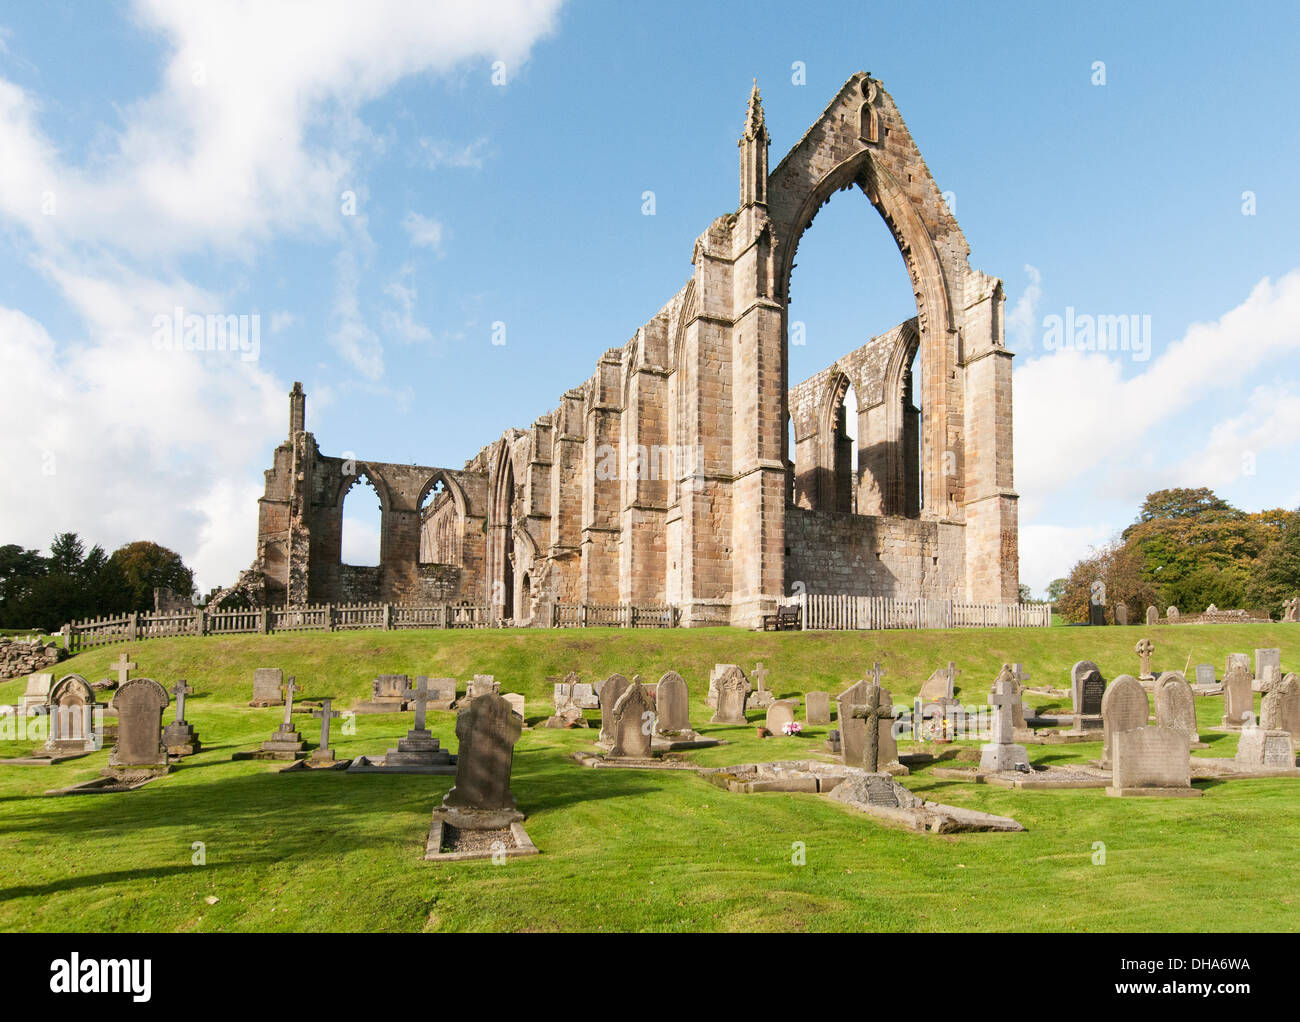 The ruins of the Augustinian Priory of St. Mary and St. Cuthbert, (Bolton Abbey) in the Yorkshire Dales National Park, England. Stock Photo